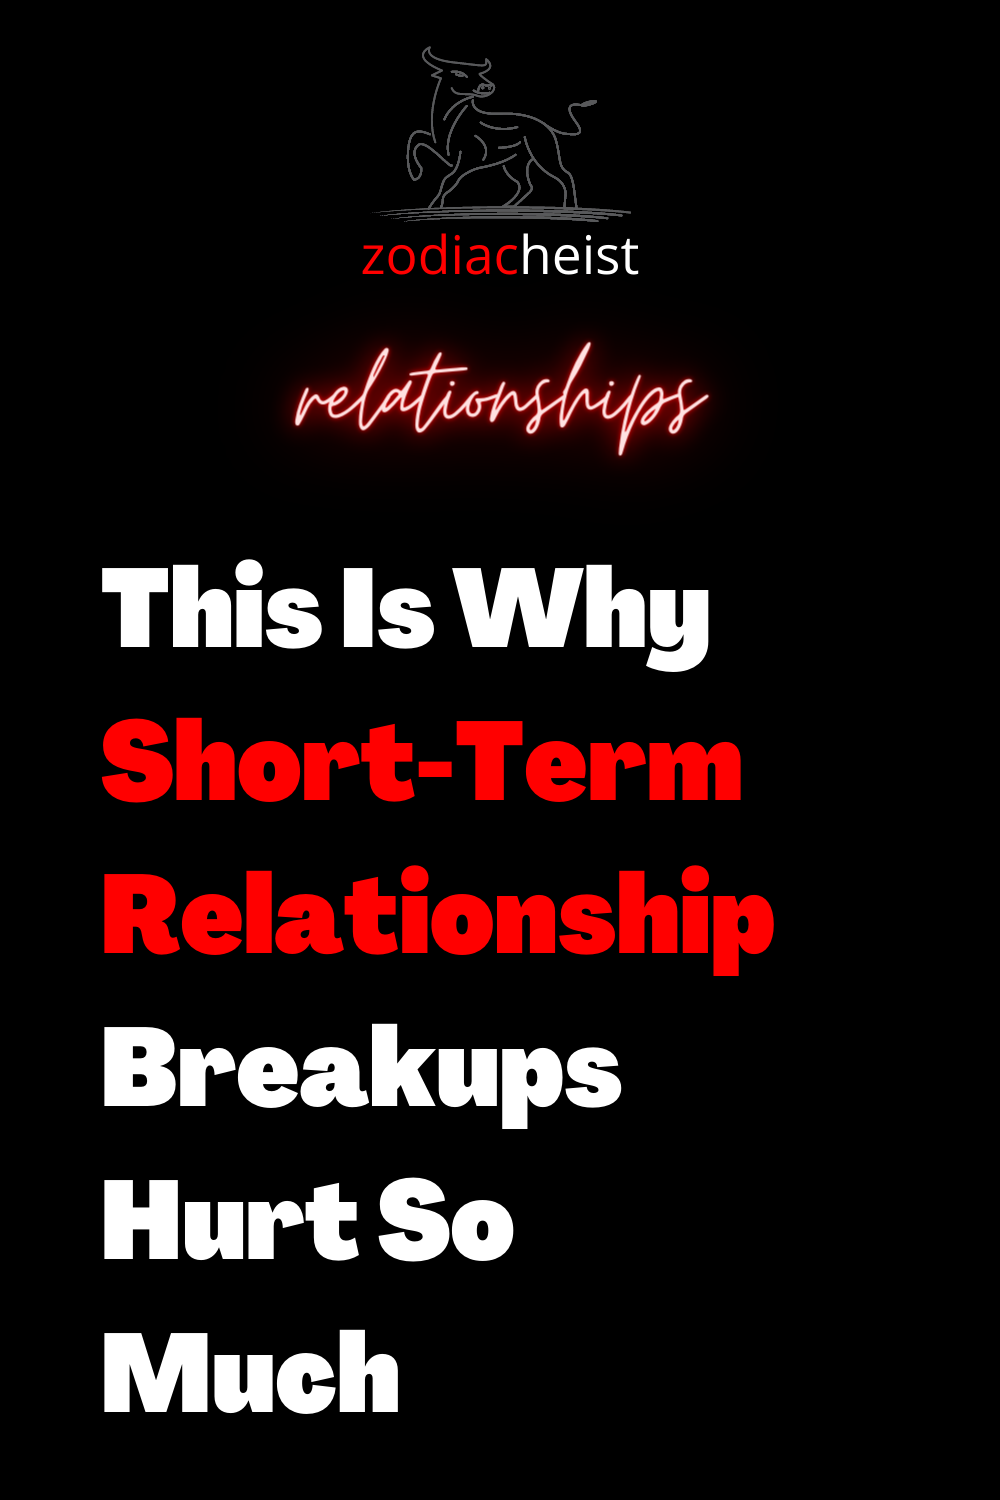 This Is Why Short-Term Relationship Breakups Hurt So Much